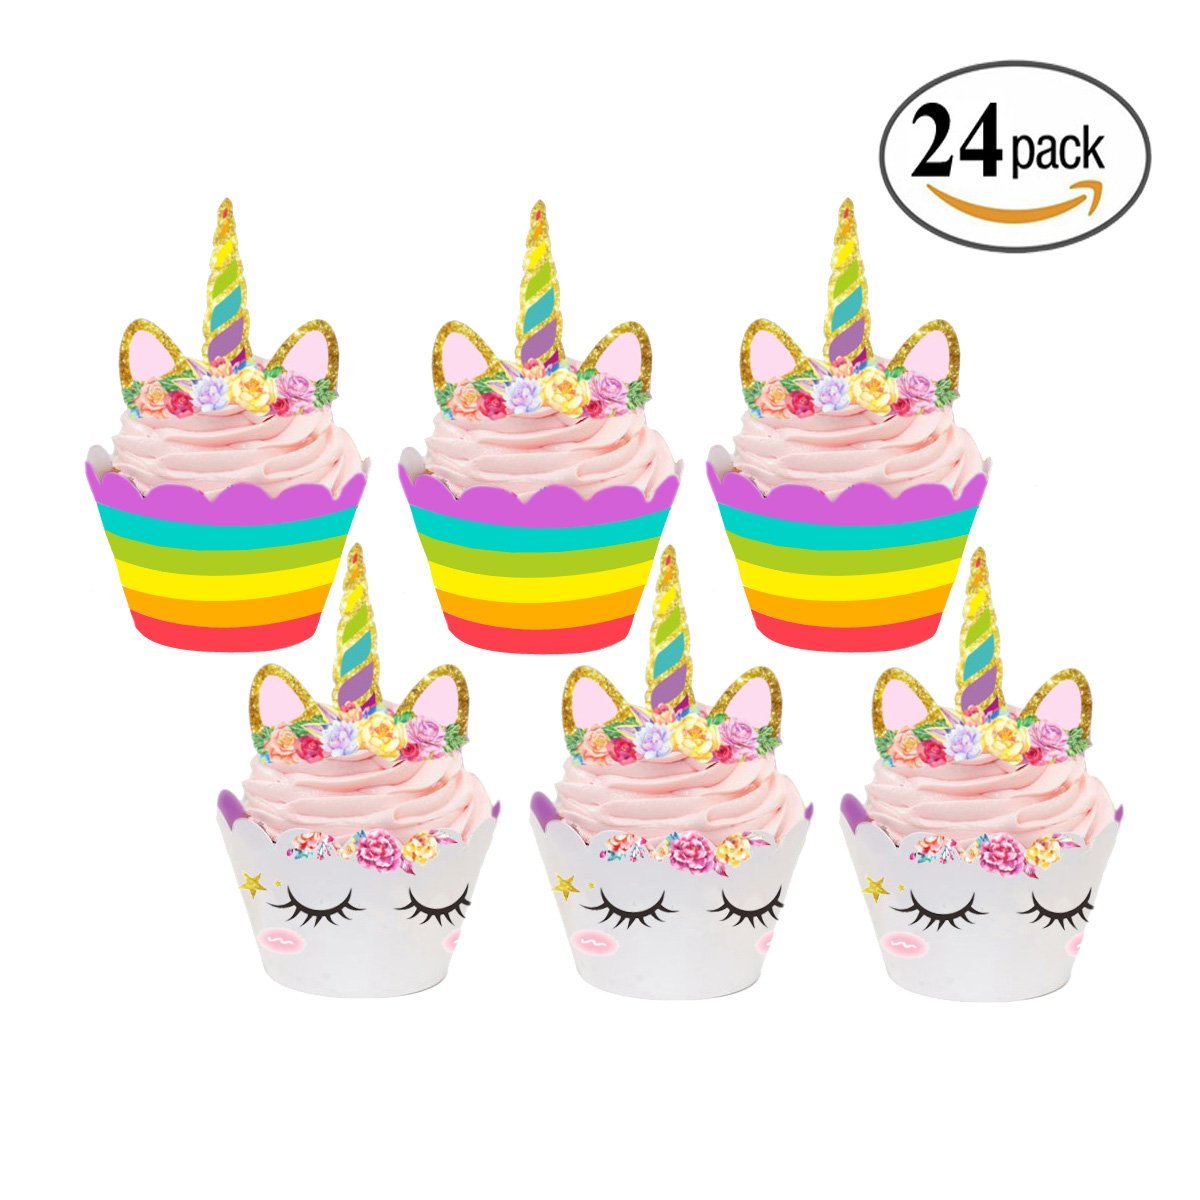 56 pcs Unicorn Cake Topper Eyelashes and flowers Set for Kids Party Decoration By FZR Legend Birthday Party Supplies with Reusable Cupcake Backing Liners Unicorn Cupcake Toppers and Wrappers